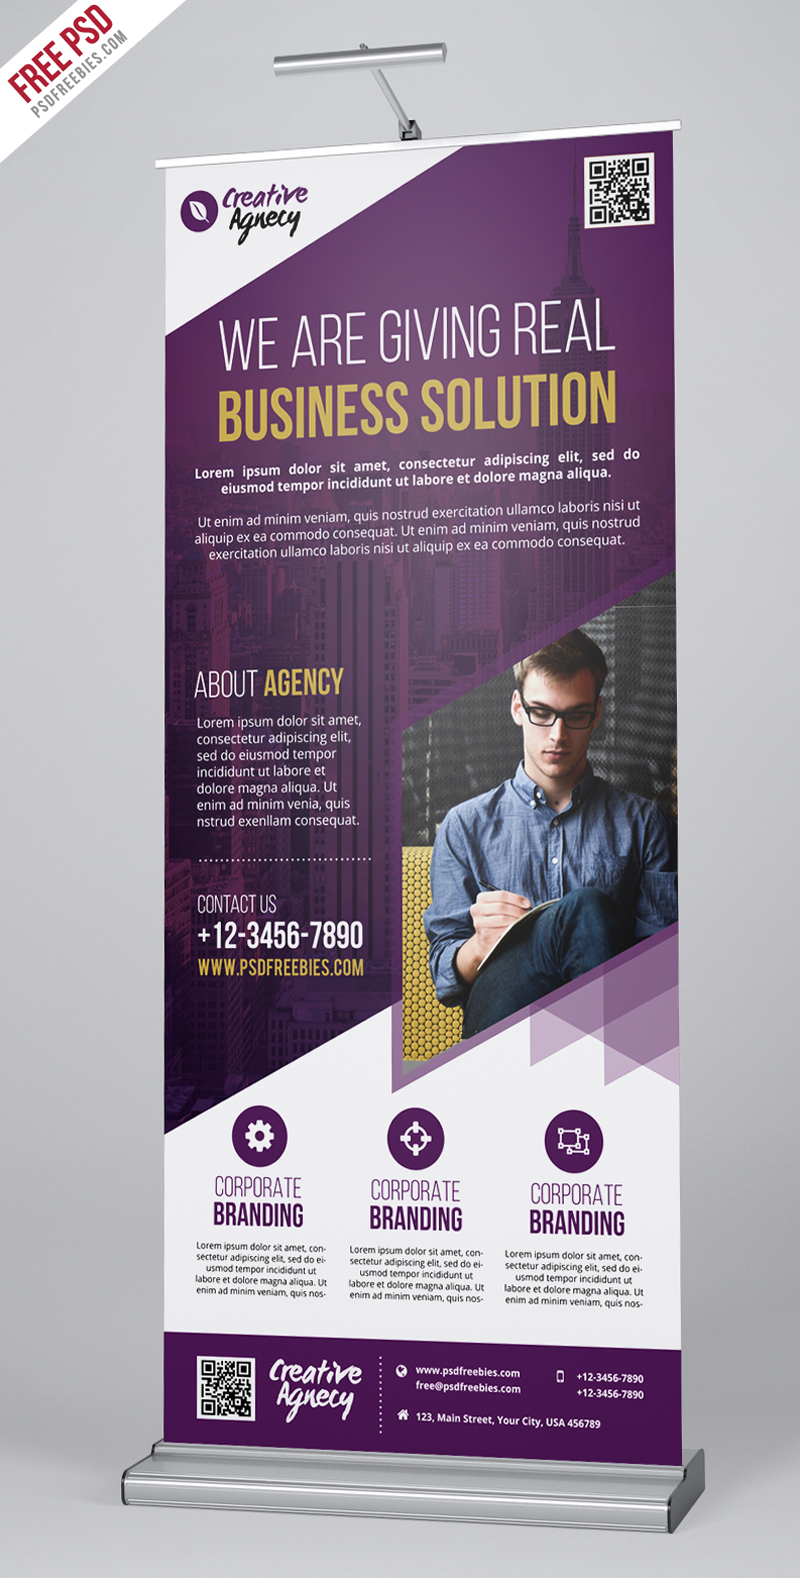 Creative Agency Roll-Up Banner PSD Free Download